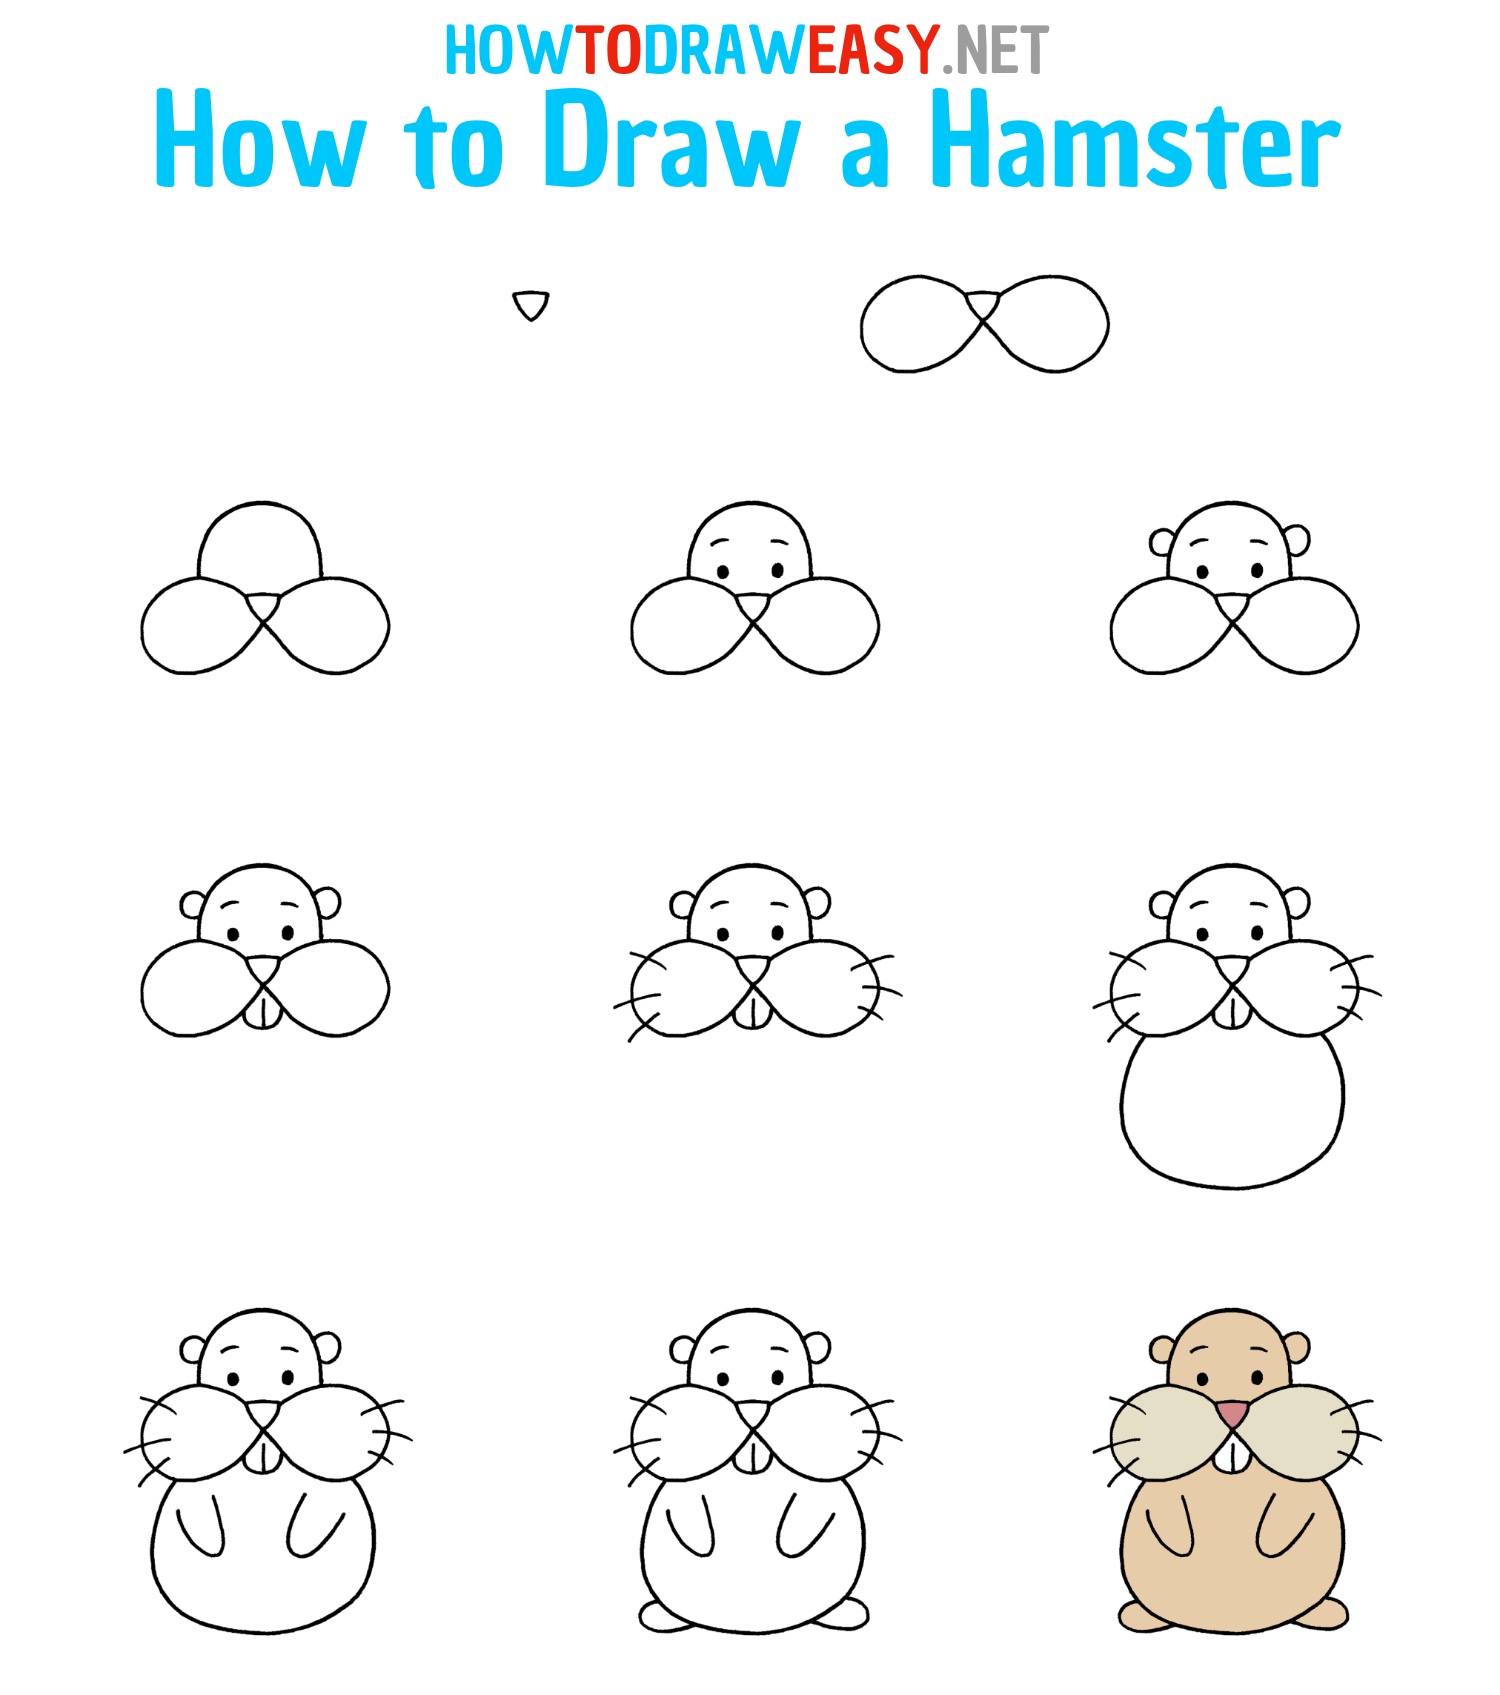 How to Draw a Hamster Step by Step